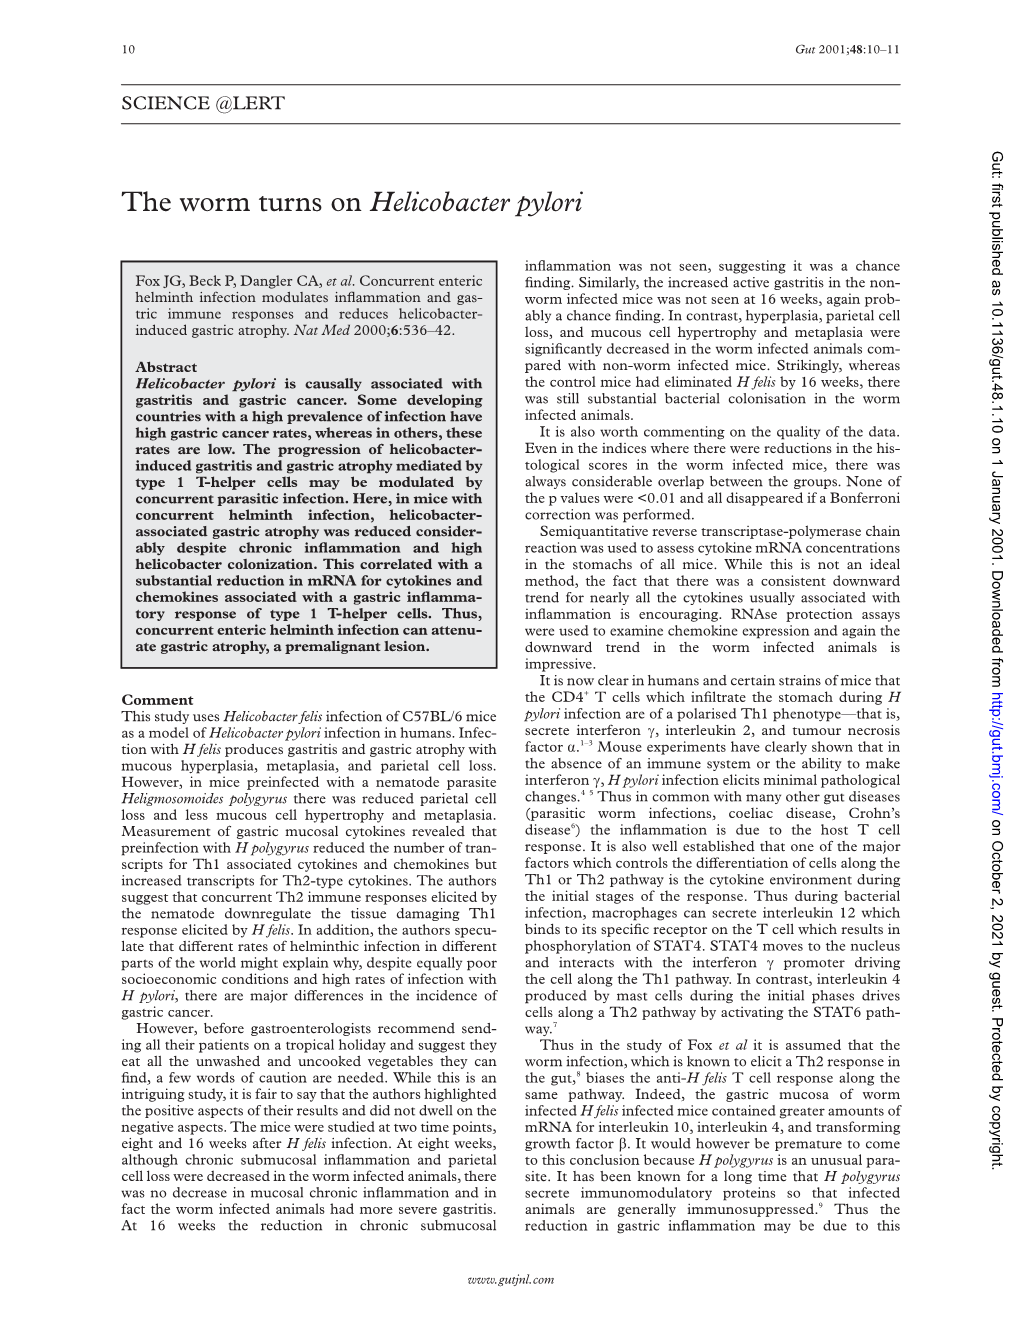 The Worm Turns on Helicobacter Pylori